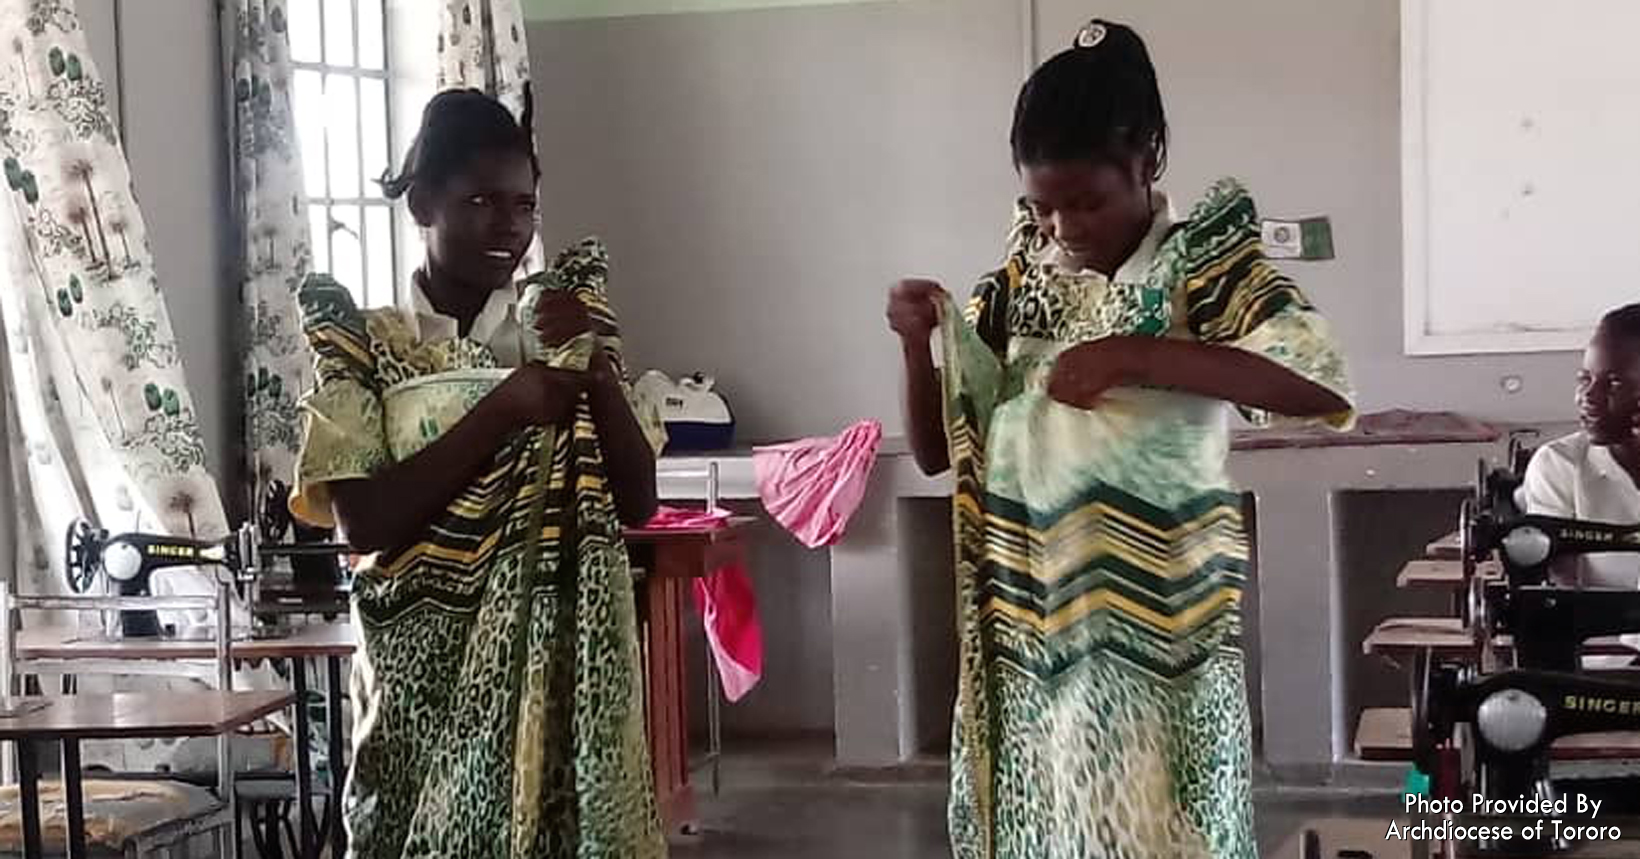 The young girls are in the workshop trying on clothes. These clothes are the ones they made with the skills they learned from tailoring.